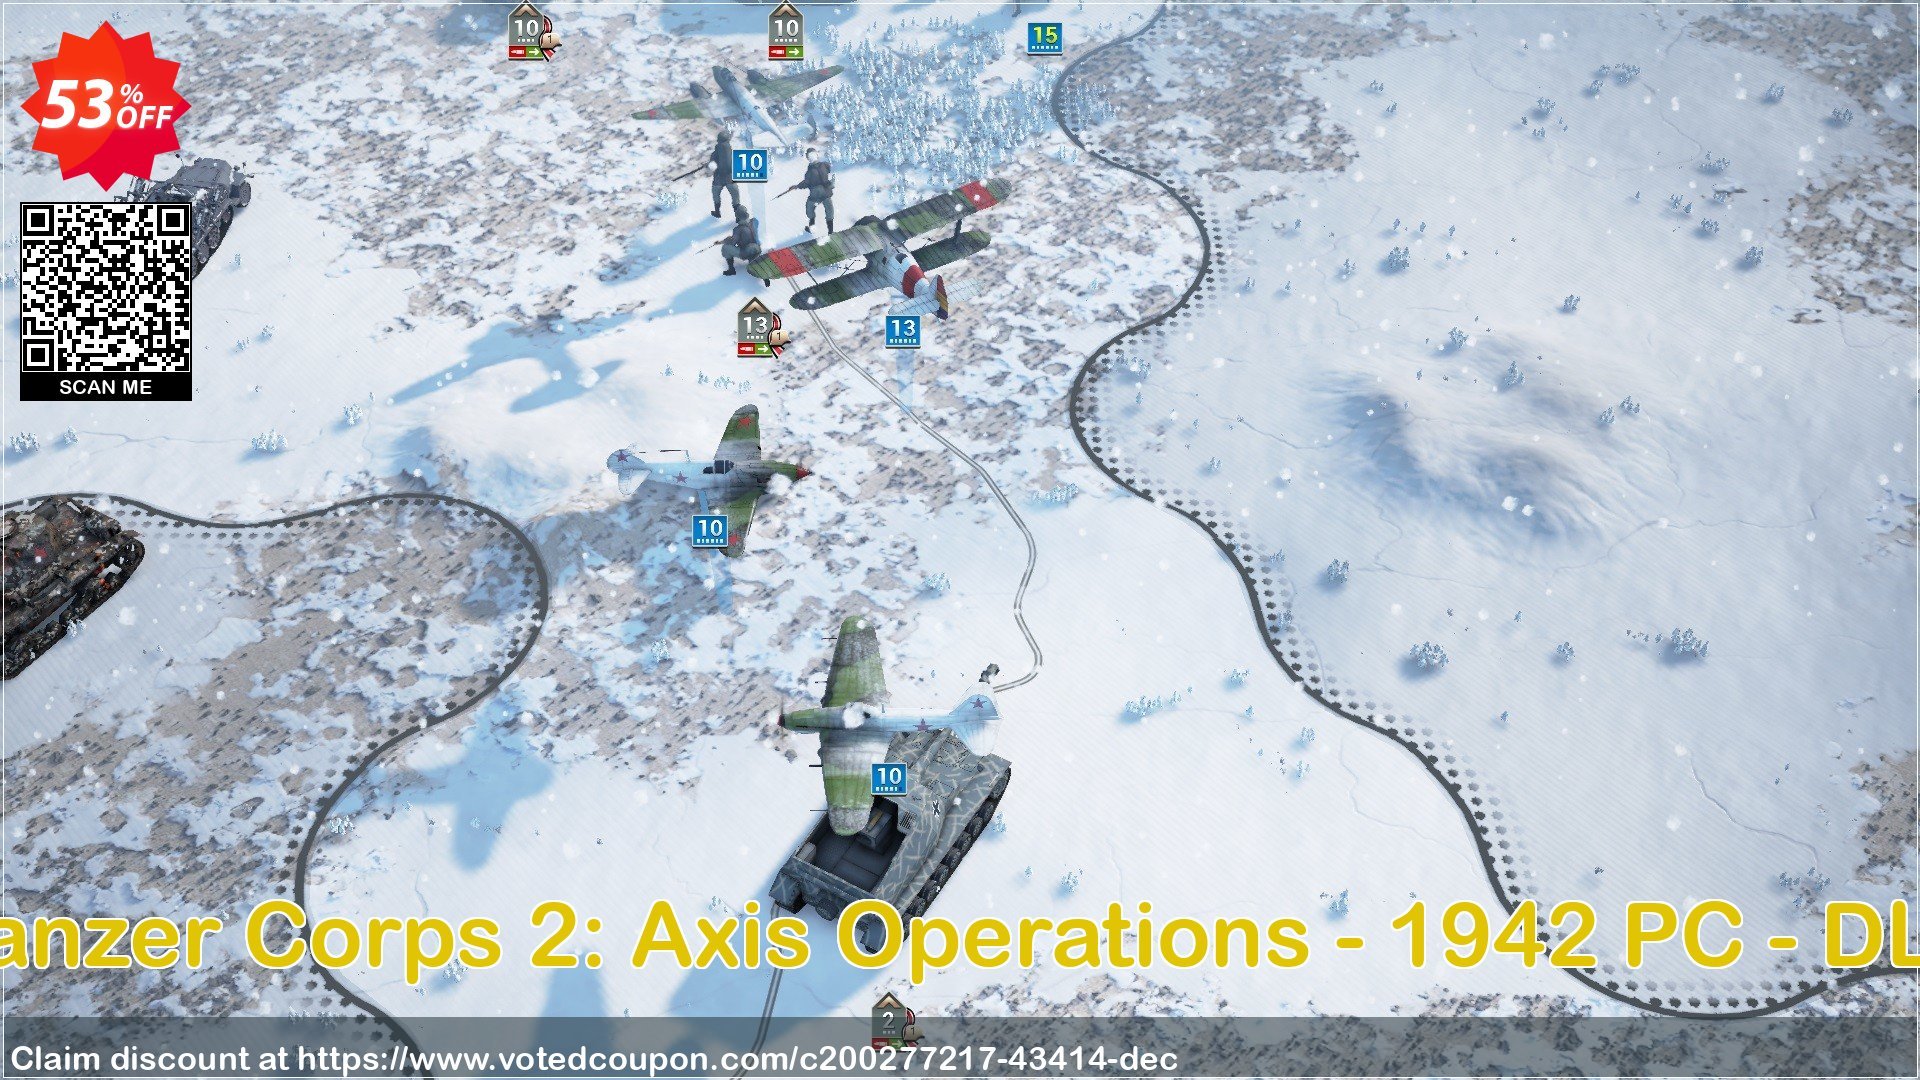 Panzer Corps 2: Axis Operations - 1942 PC - DLC Coupon Code May 2024, 53% OFF - VotedCoupon